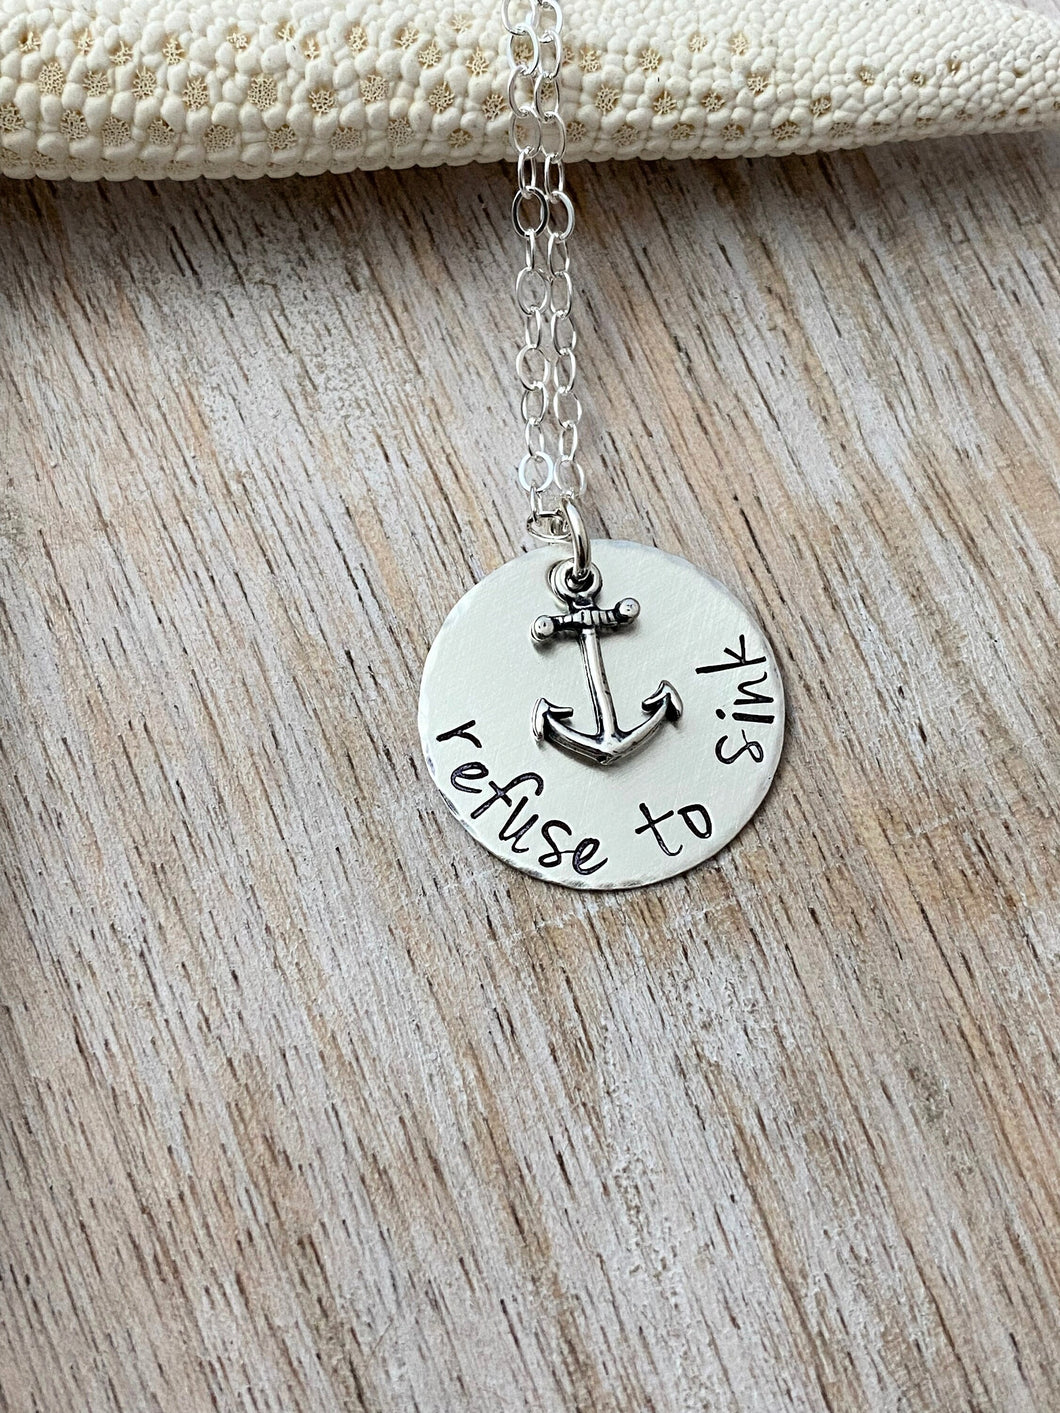 Sterling silver motivational necklace, Hand Stamped, refuse to sink - nautical anchor necklace -Beach Jewelry, hope, inspirational